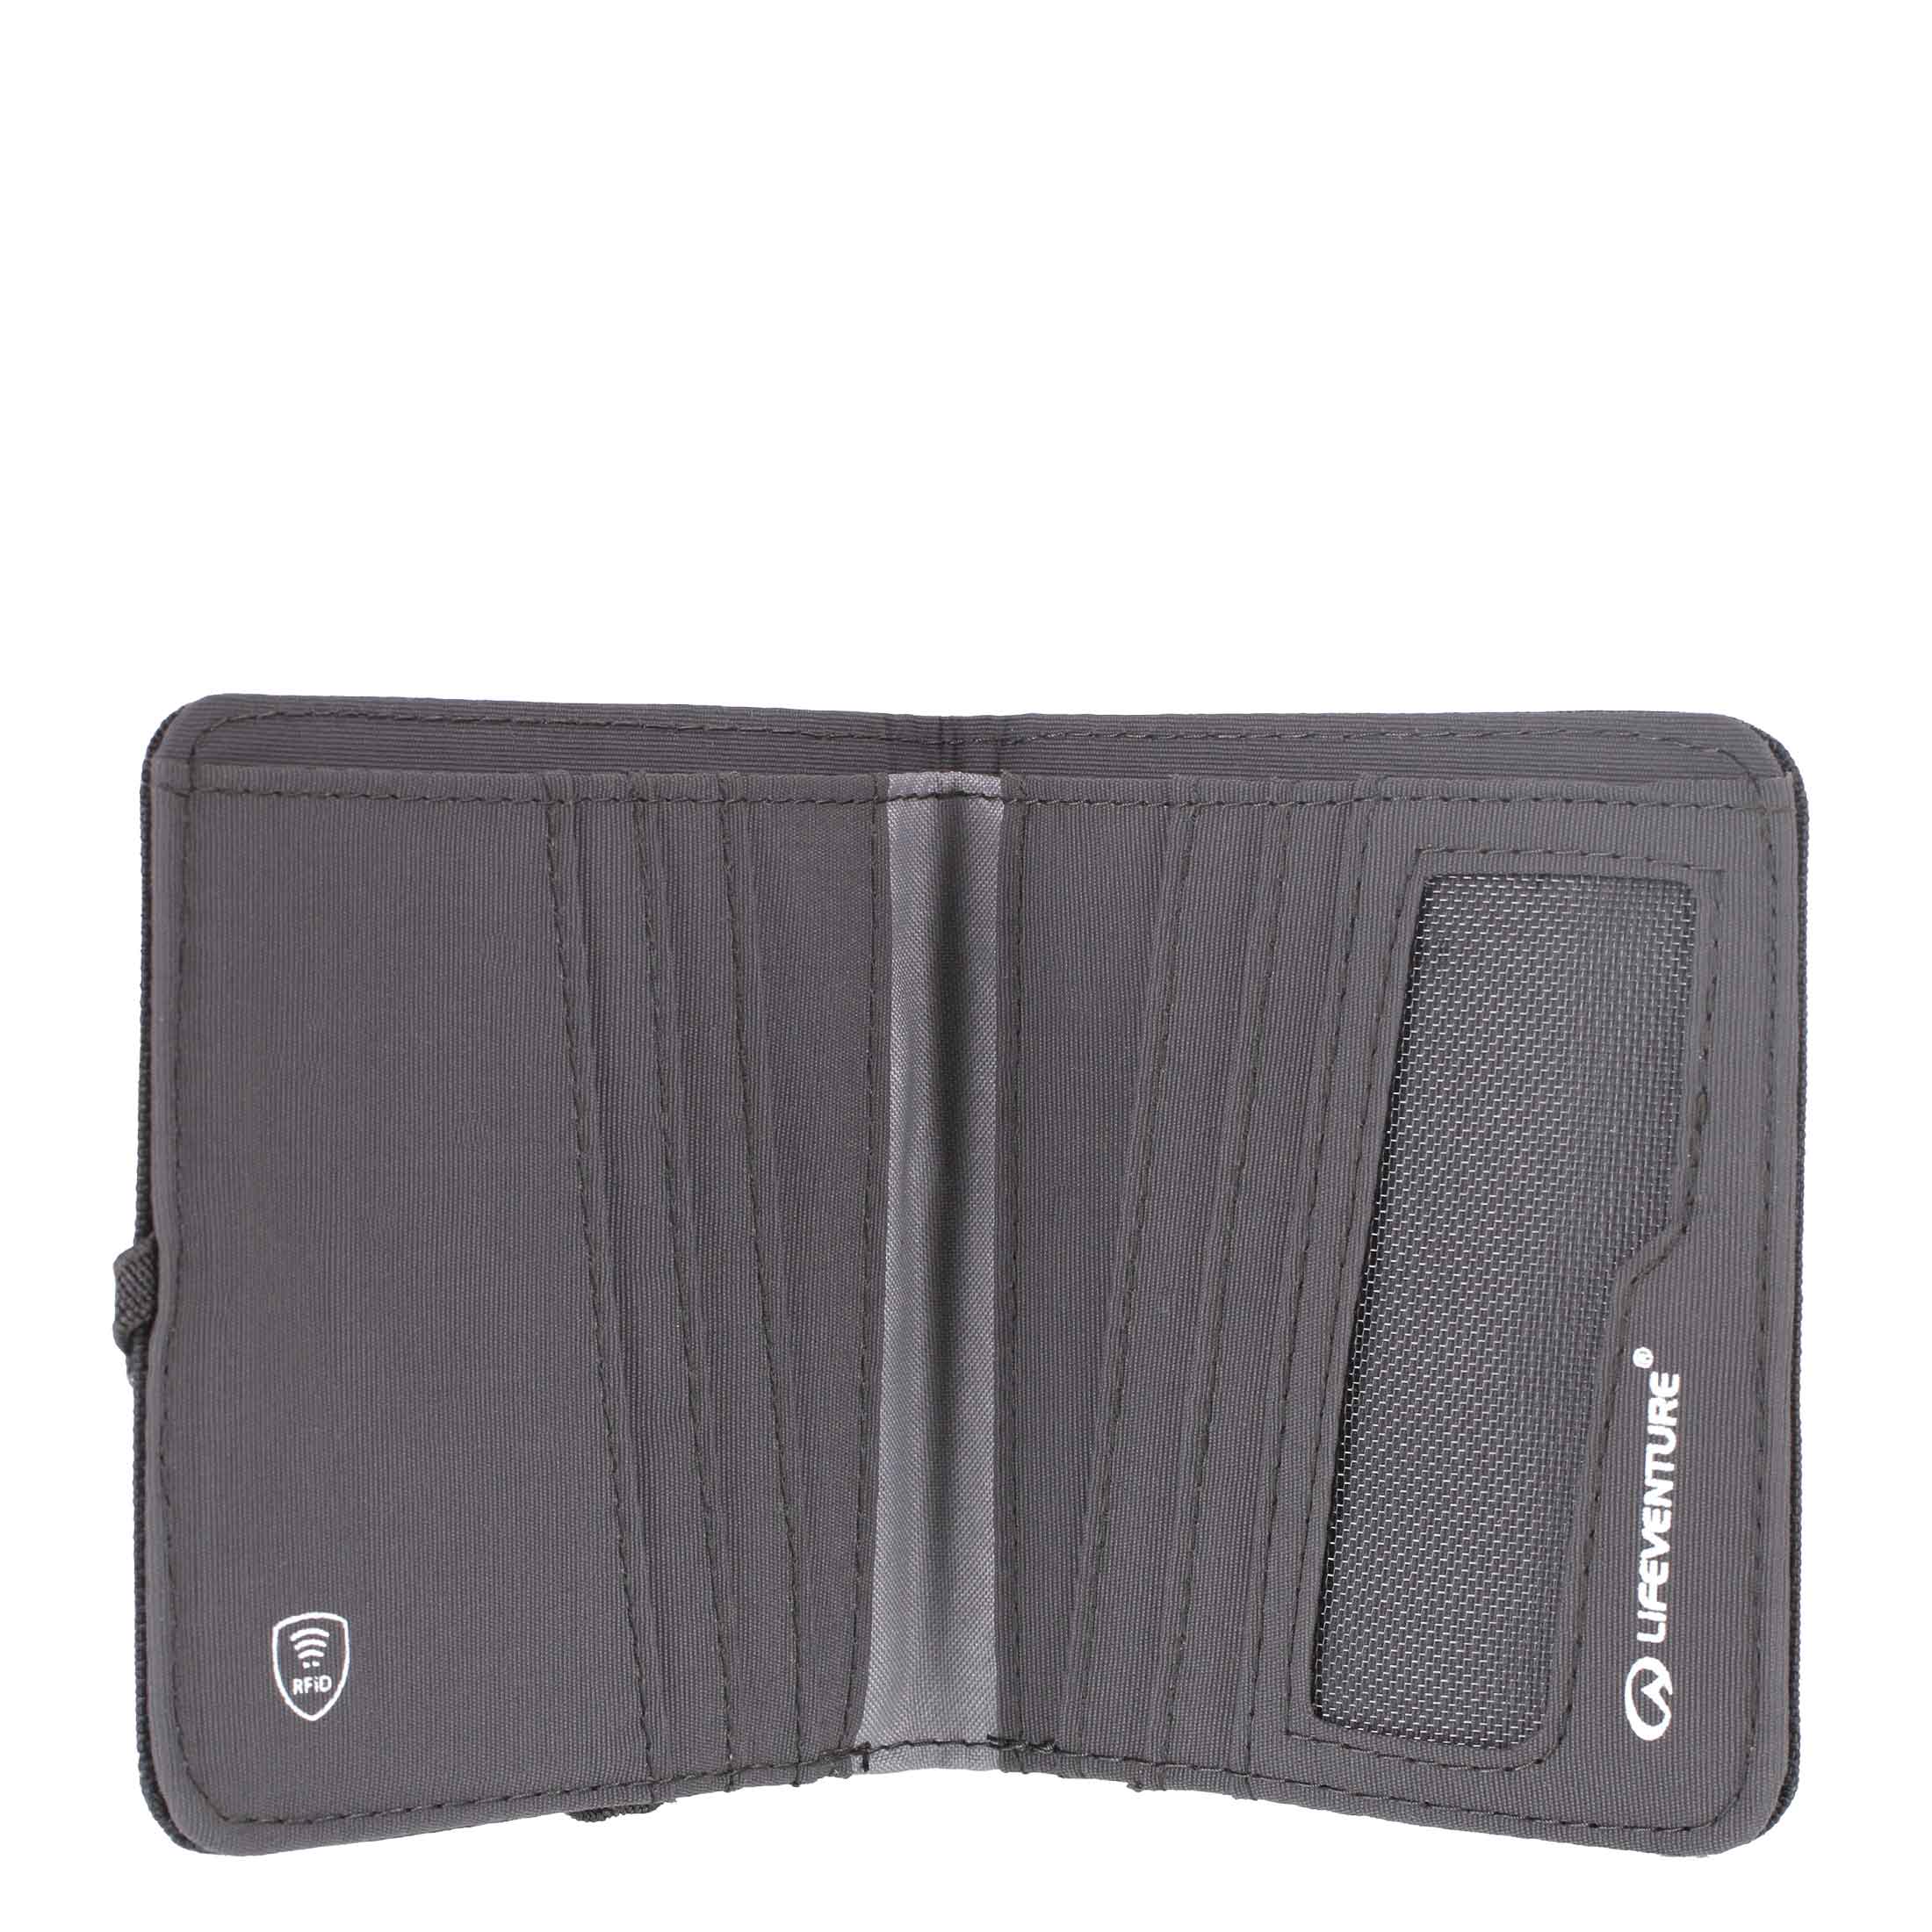 Compact Wallet, Compact RFiD Wallet